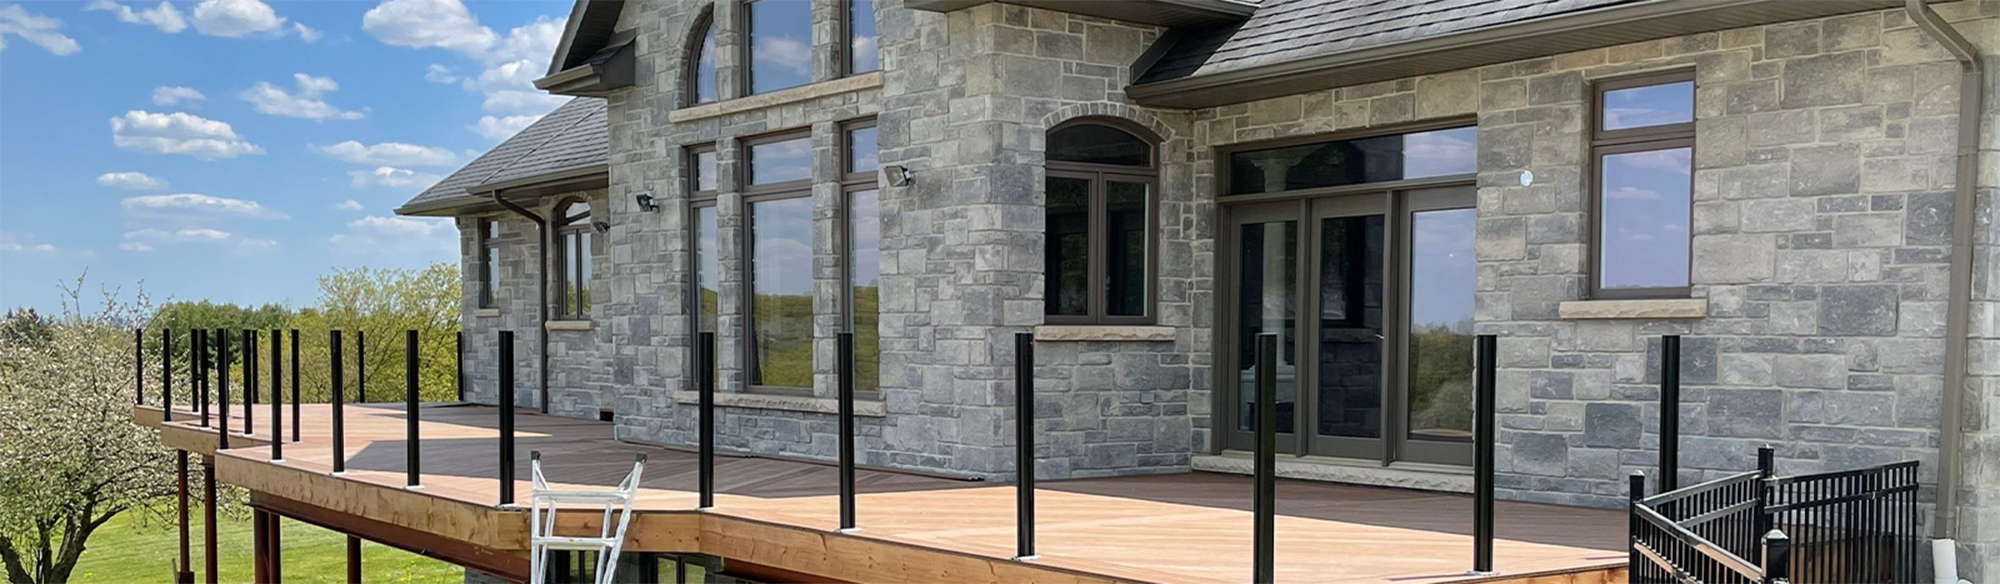 Custom wood deck surrounded by Canadian-made glass railing in backyard of large grey brick house.